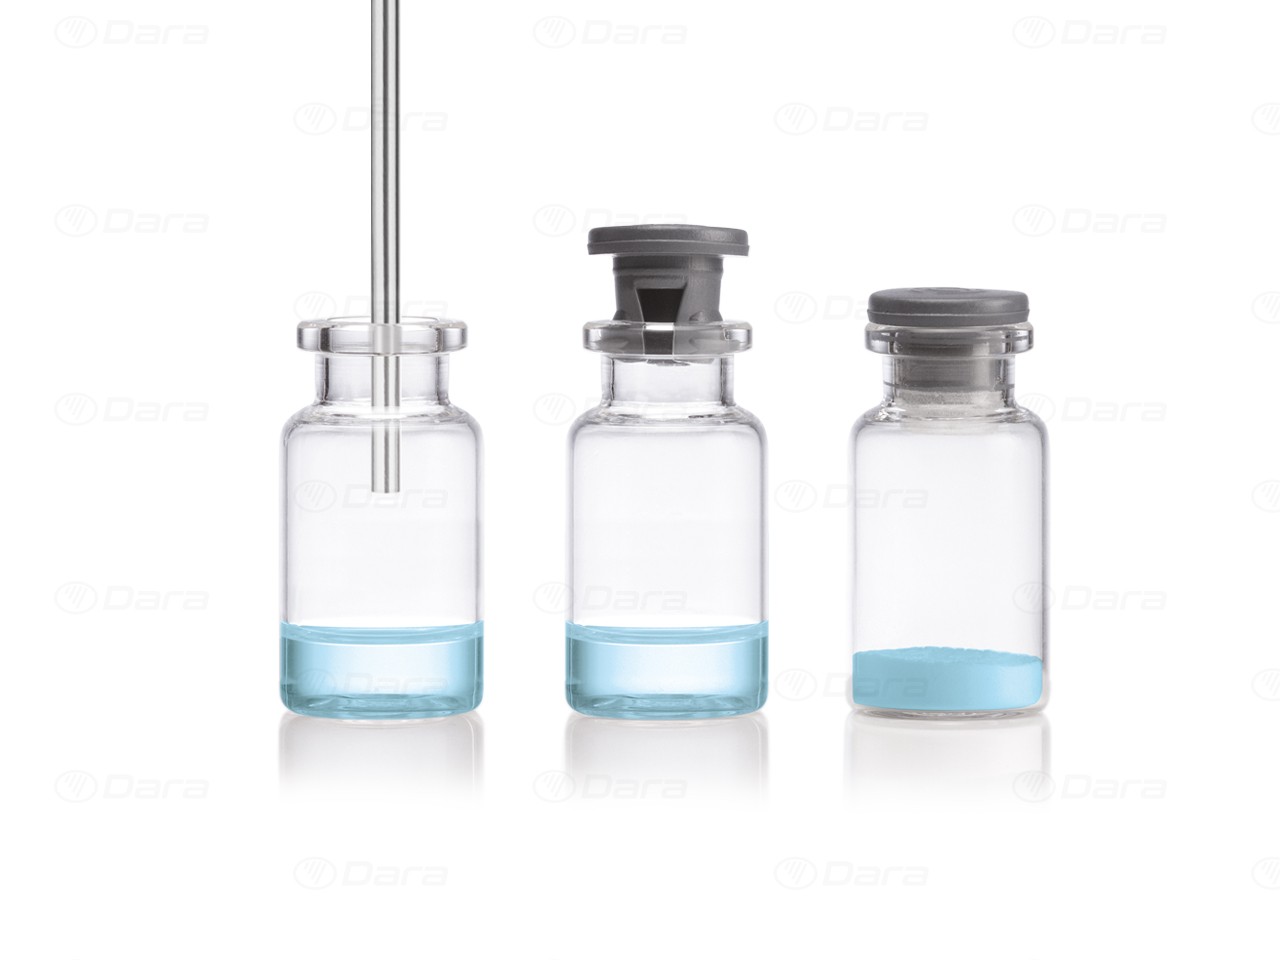 Complete lines for injectable vials